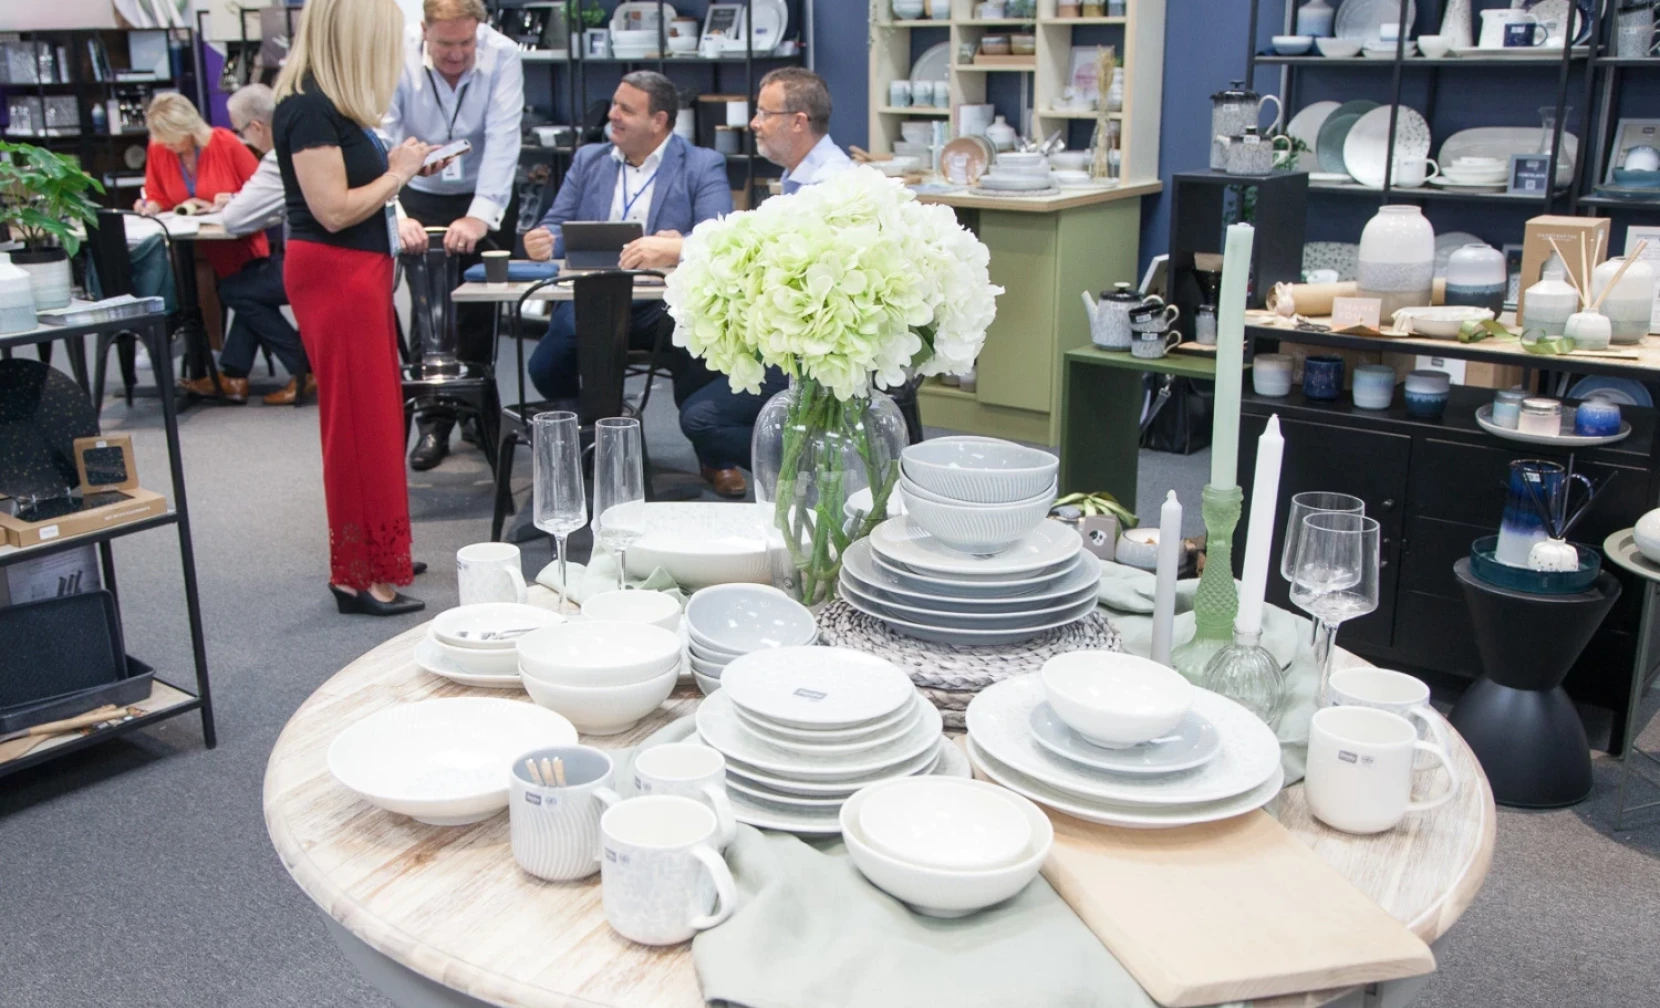 homeware trade show with homeware products on show